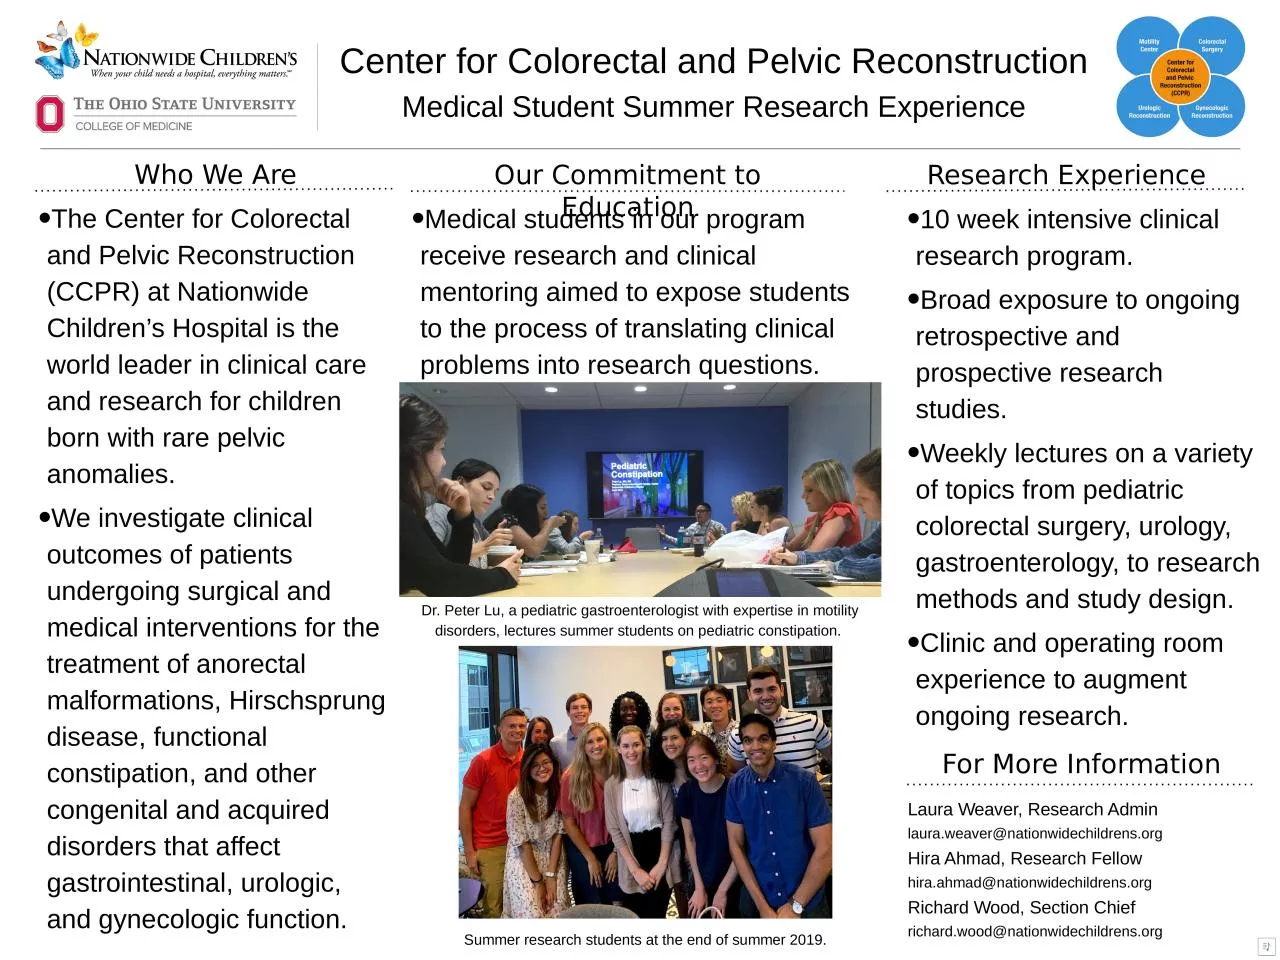 The Center for Colorectal and Pelvic Reconstruction (CCPR) at Nationwide Children’s